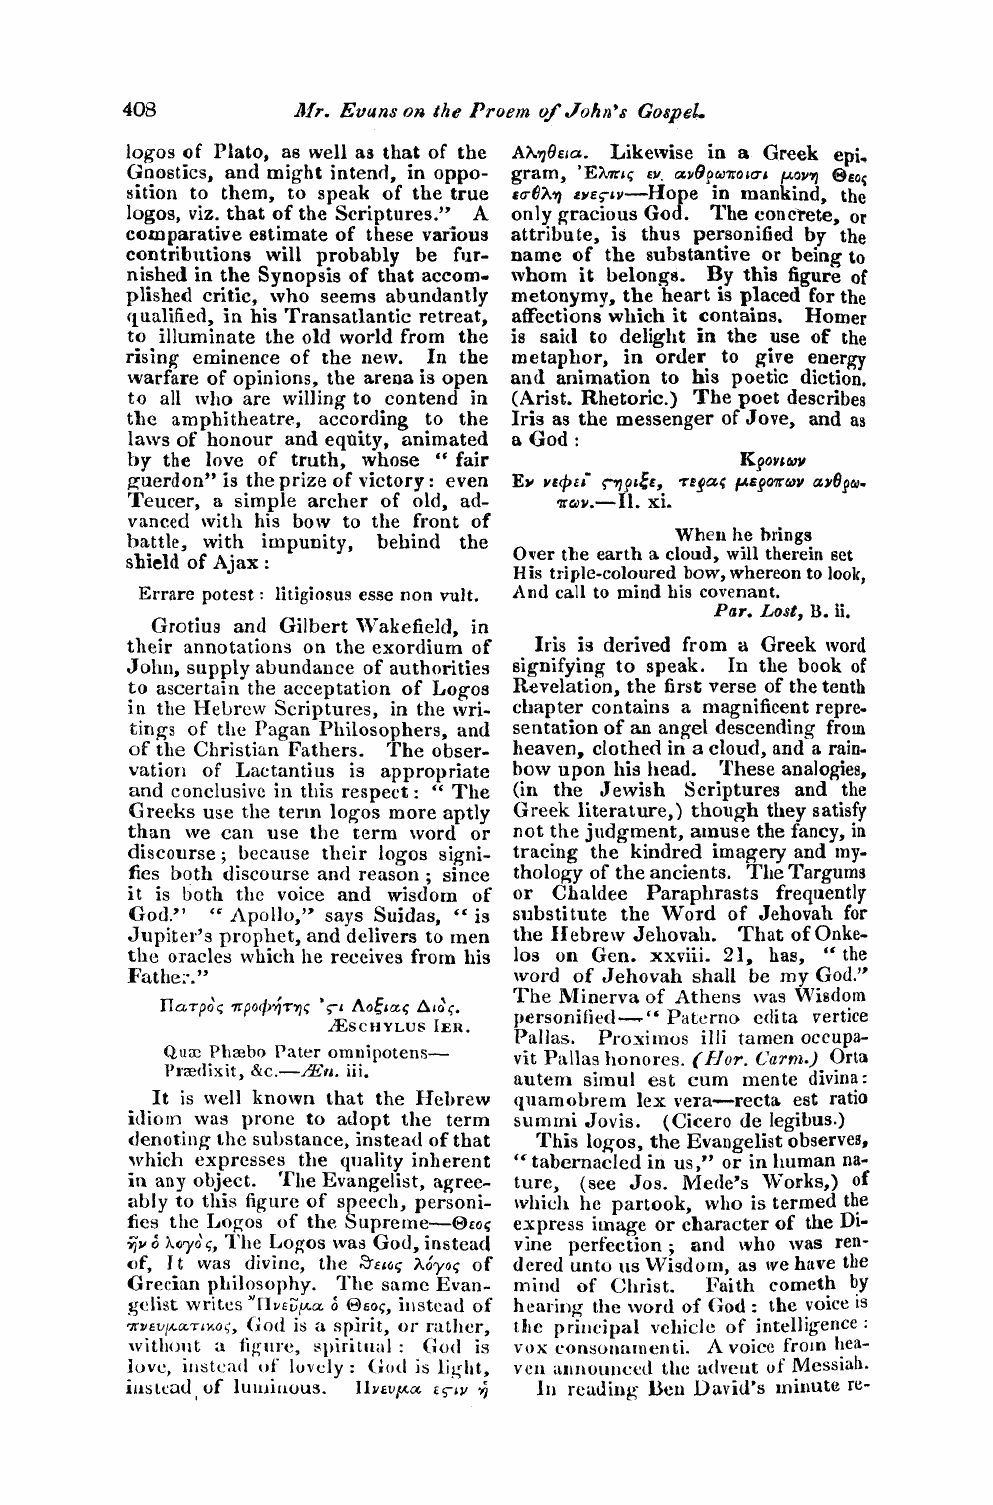 Monthly Repository (1806-1838) and Unitarian Chronicle (1832-1833): F Y, 1st edition: 28